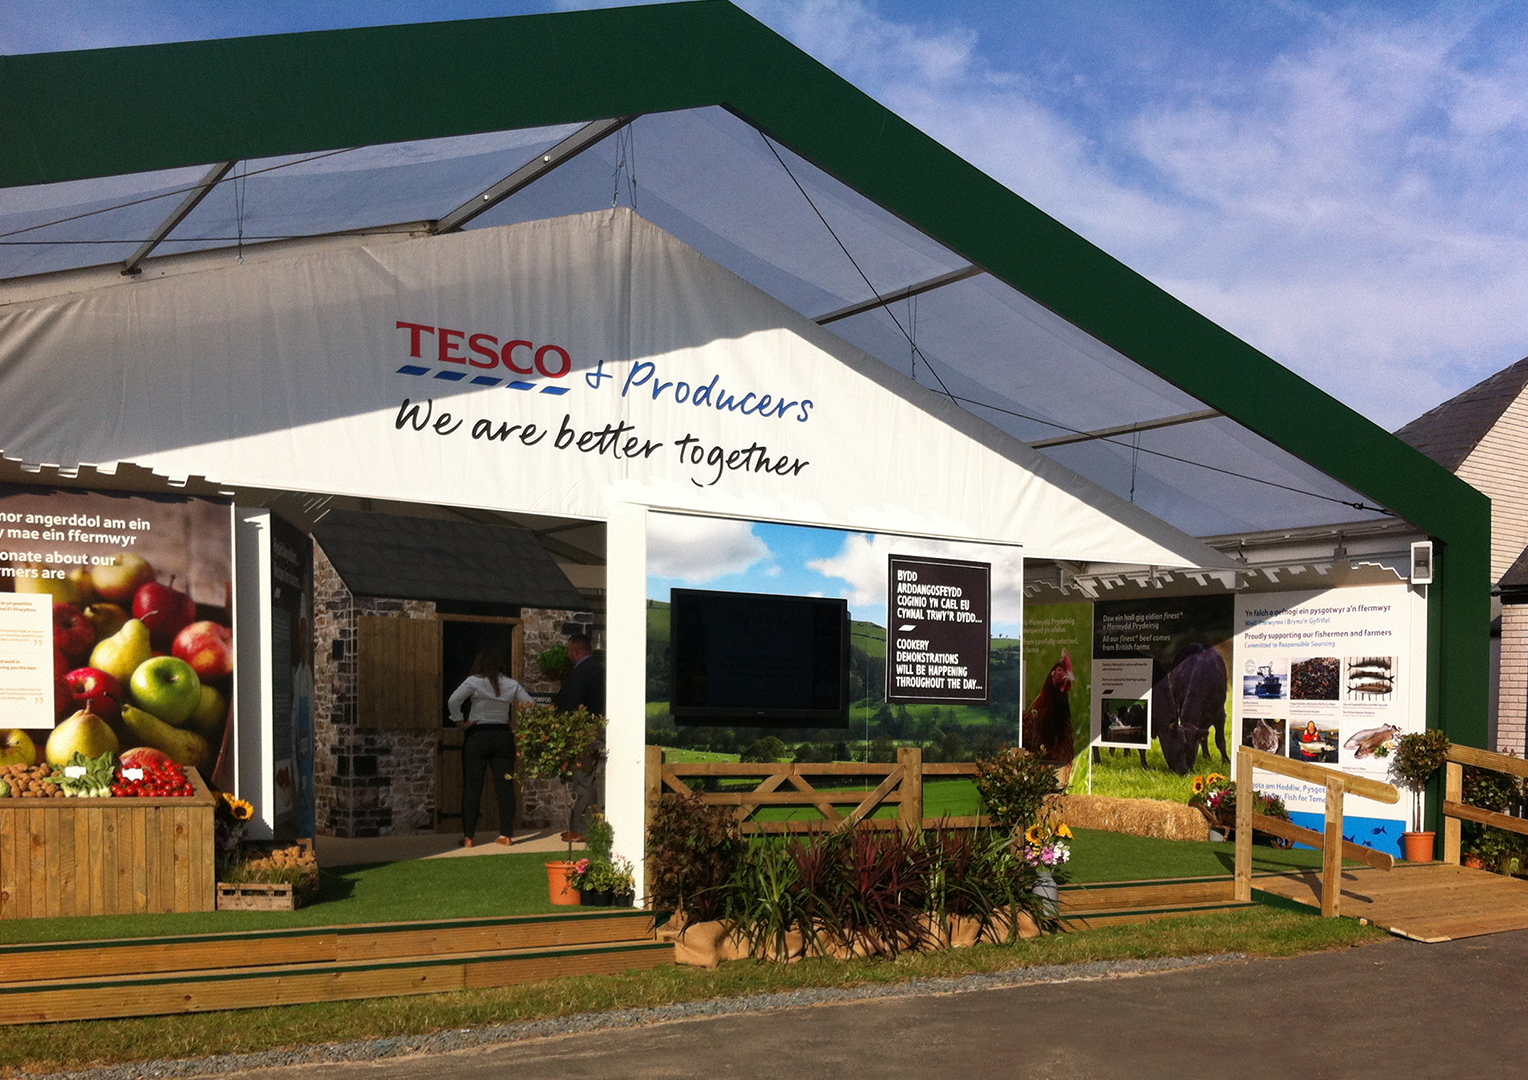 Tesco. Agricultural Show. Event space large format branding. Freelance Creative Artworker Manchester.